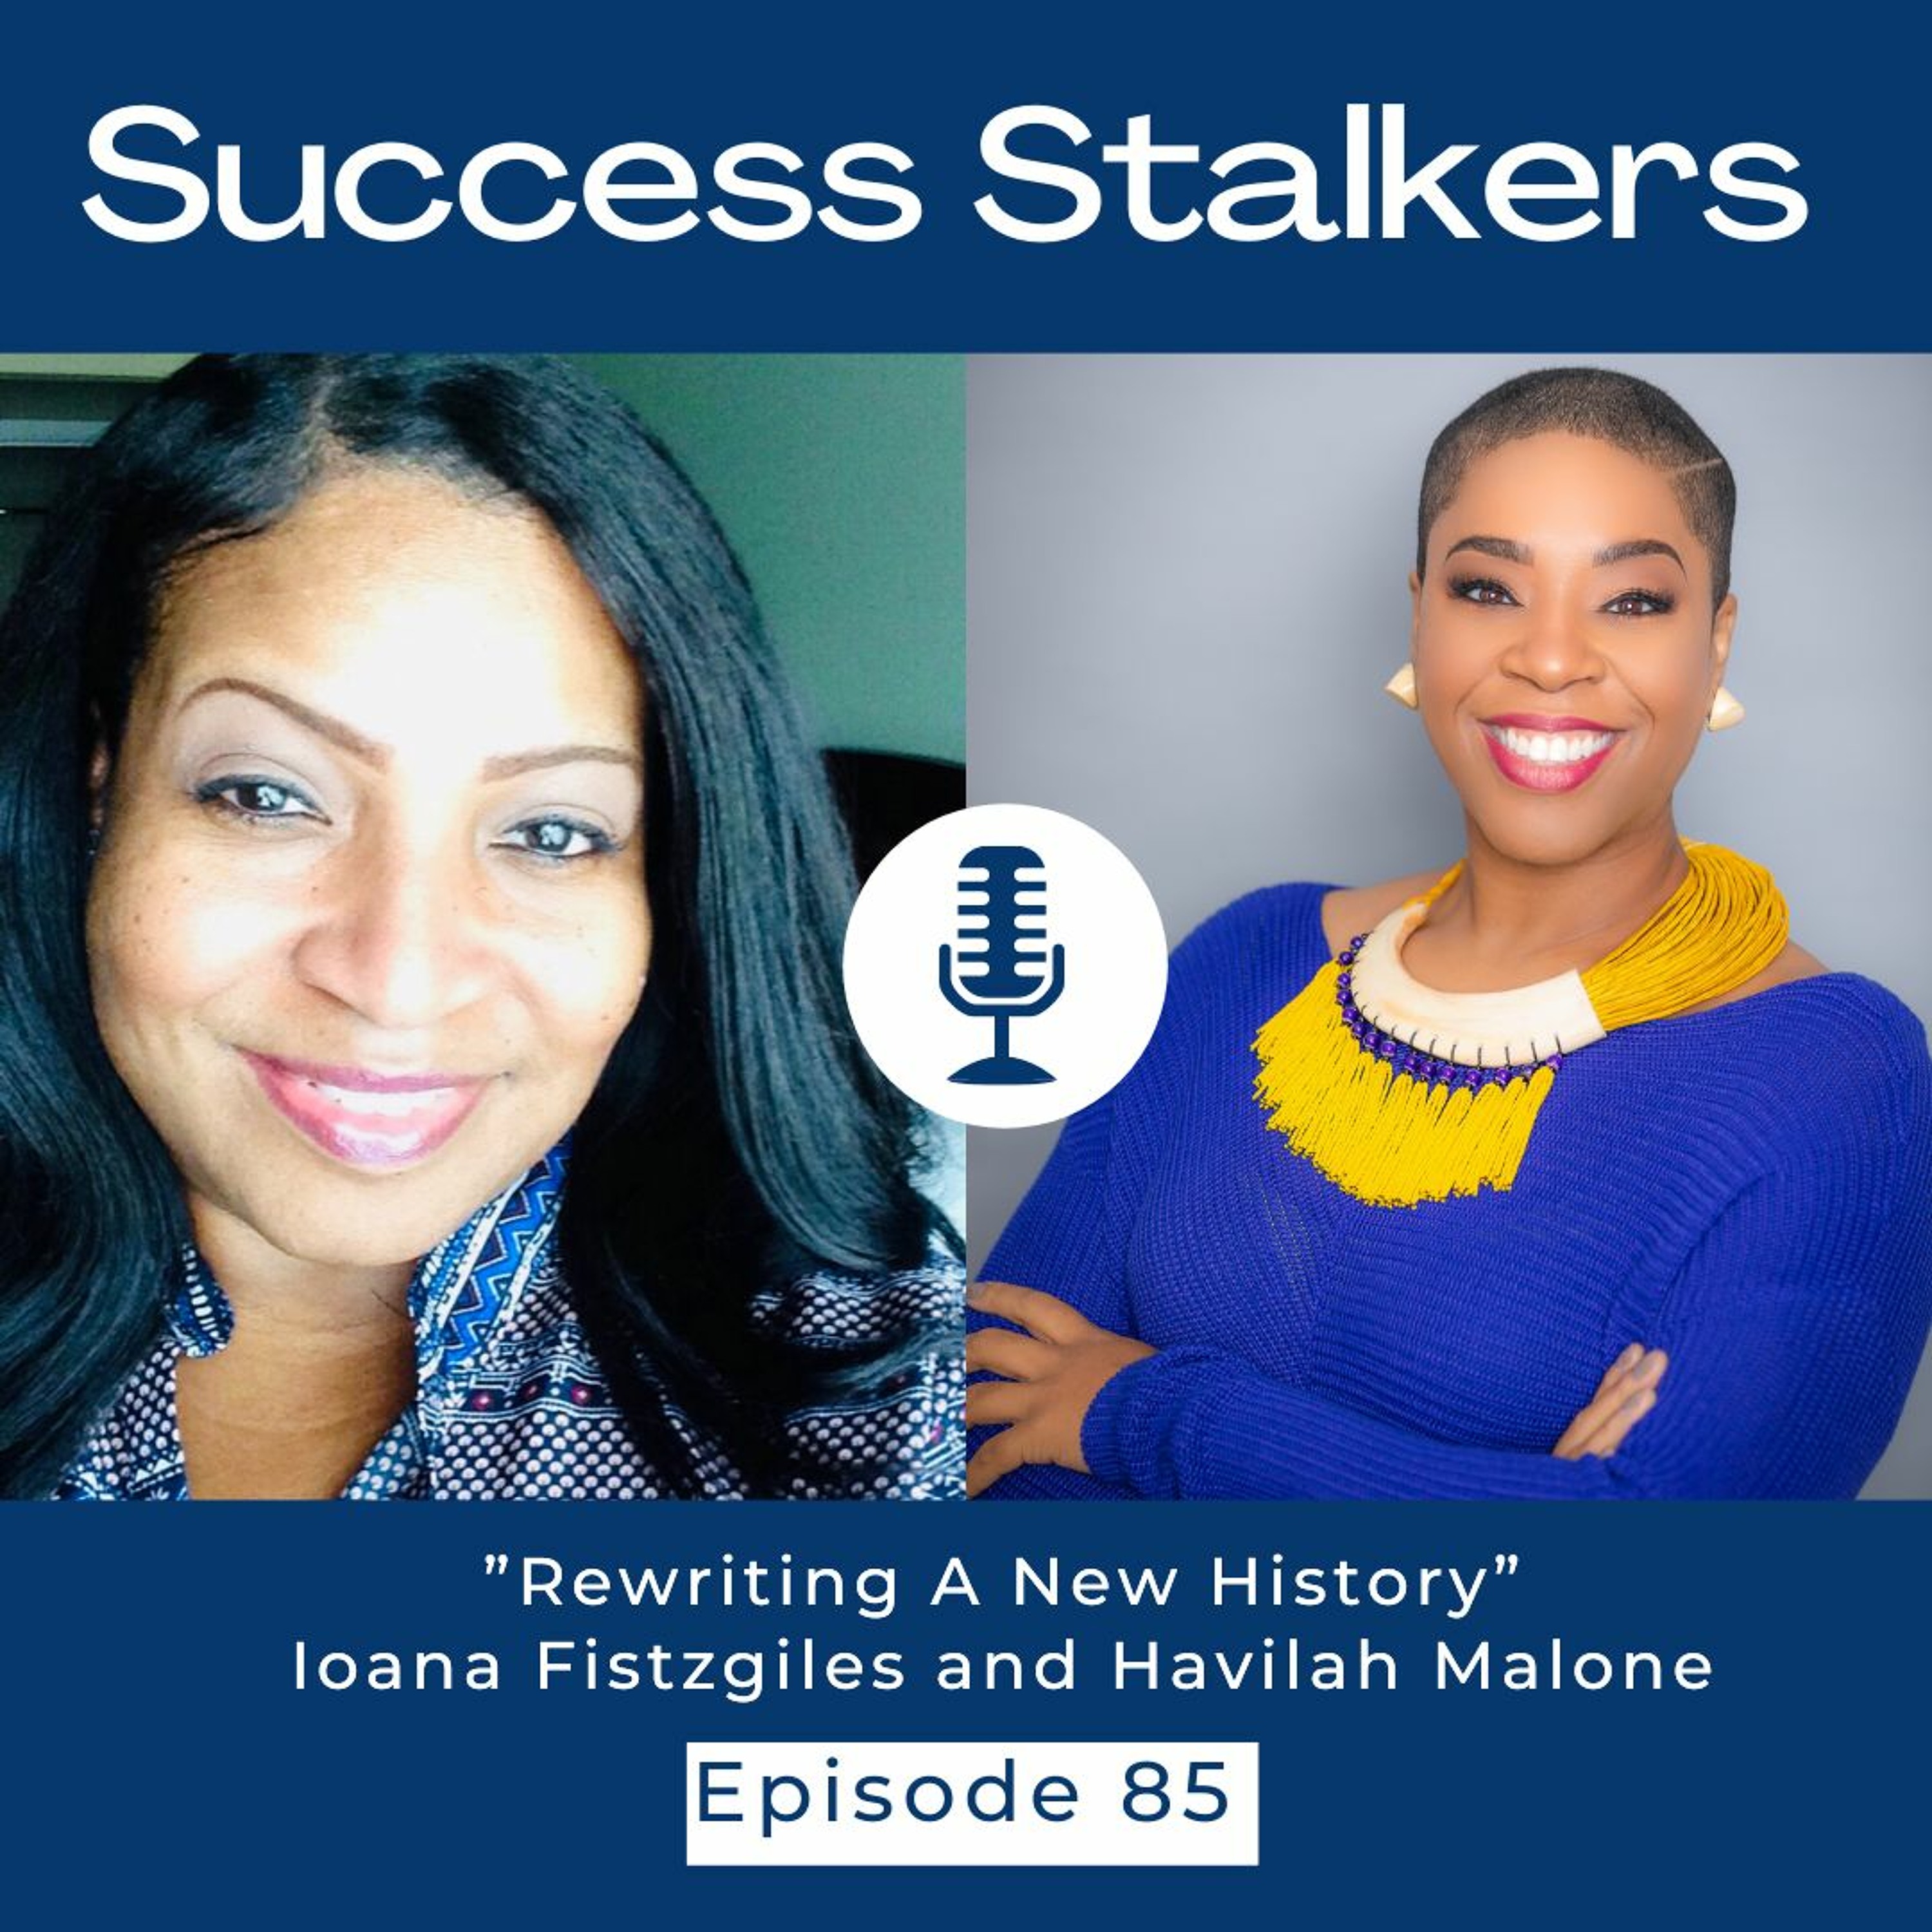 EPISODE 85: Rewriting a New History with Havilah Malone Image